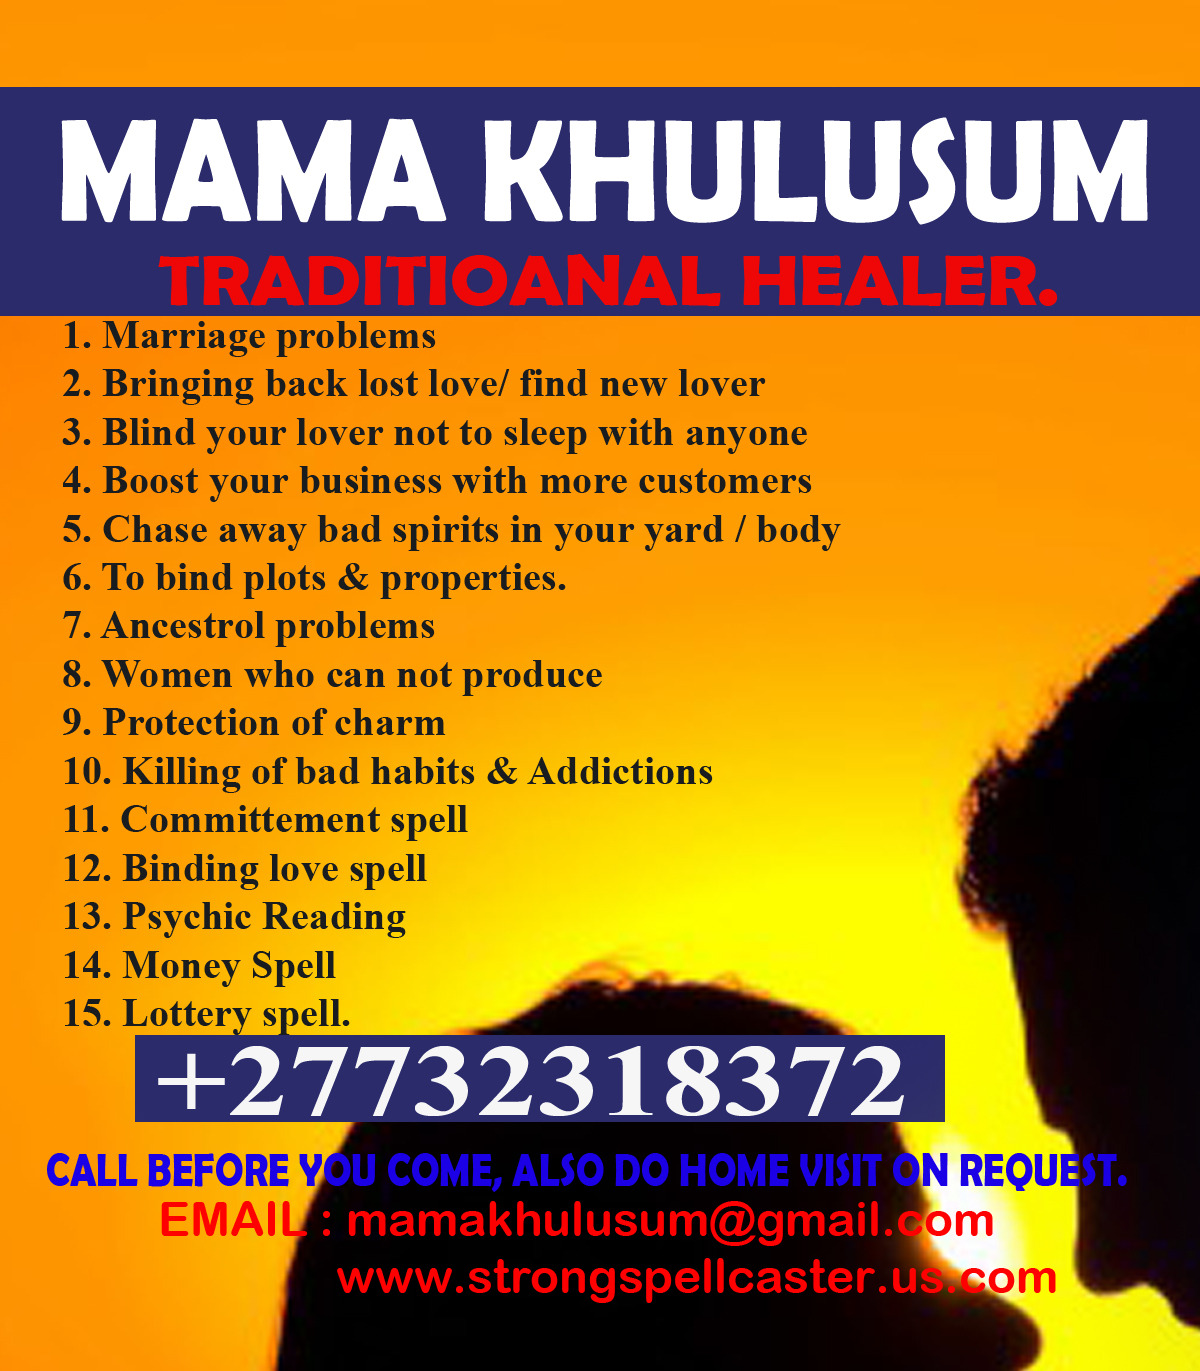 Prof Mama Khulusum +27732318372 Best Love spells in Malta.,Johannesburg,Services,Free Classifieds,Post Free Ads,77traders.com